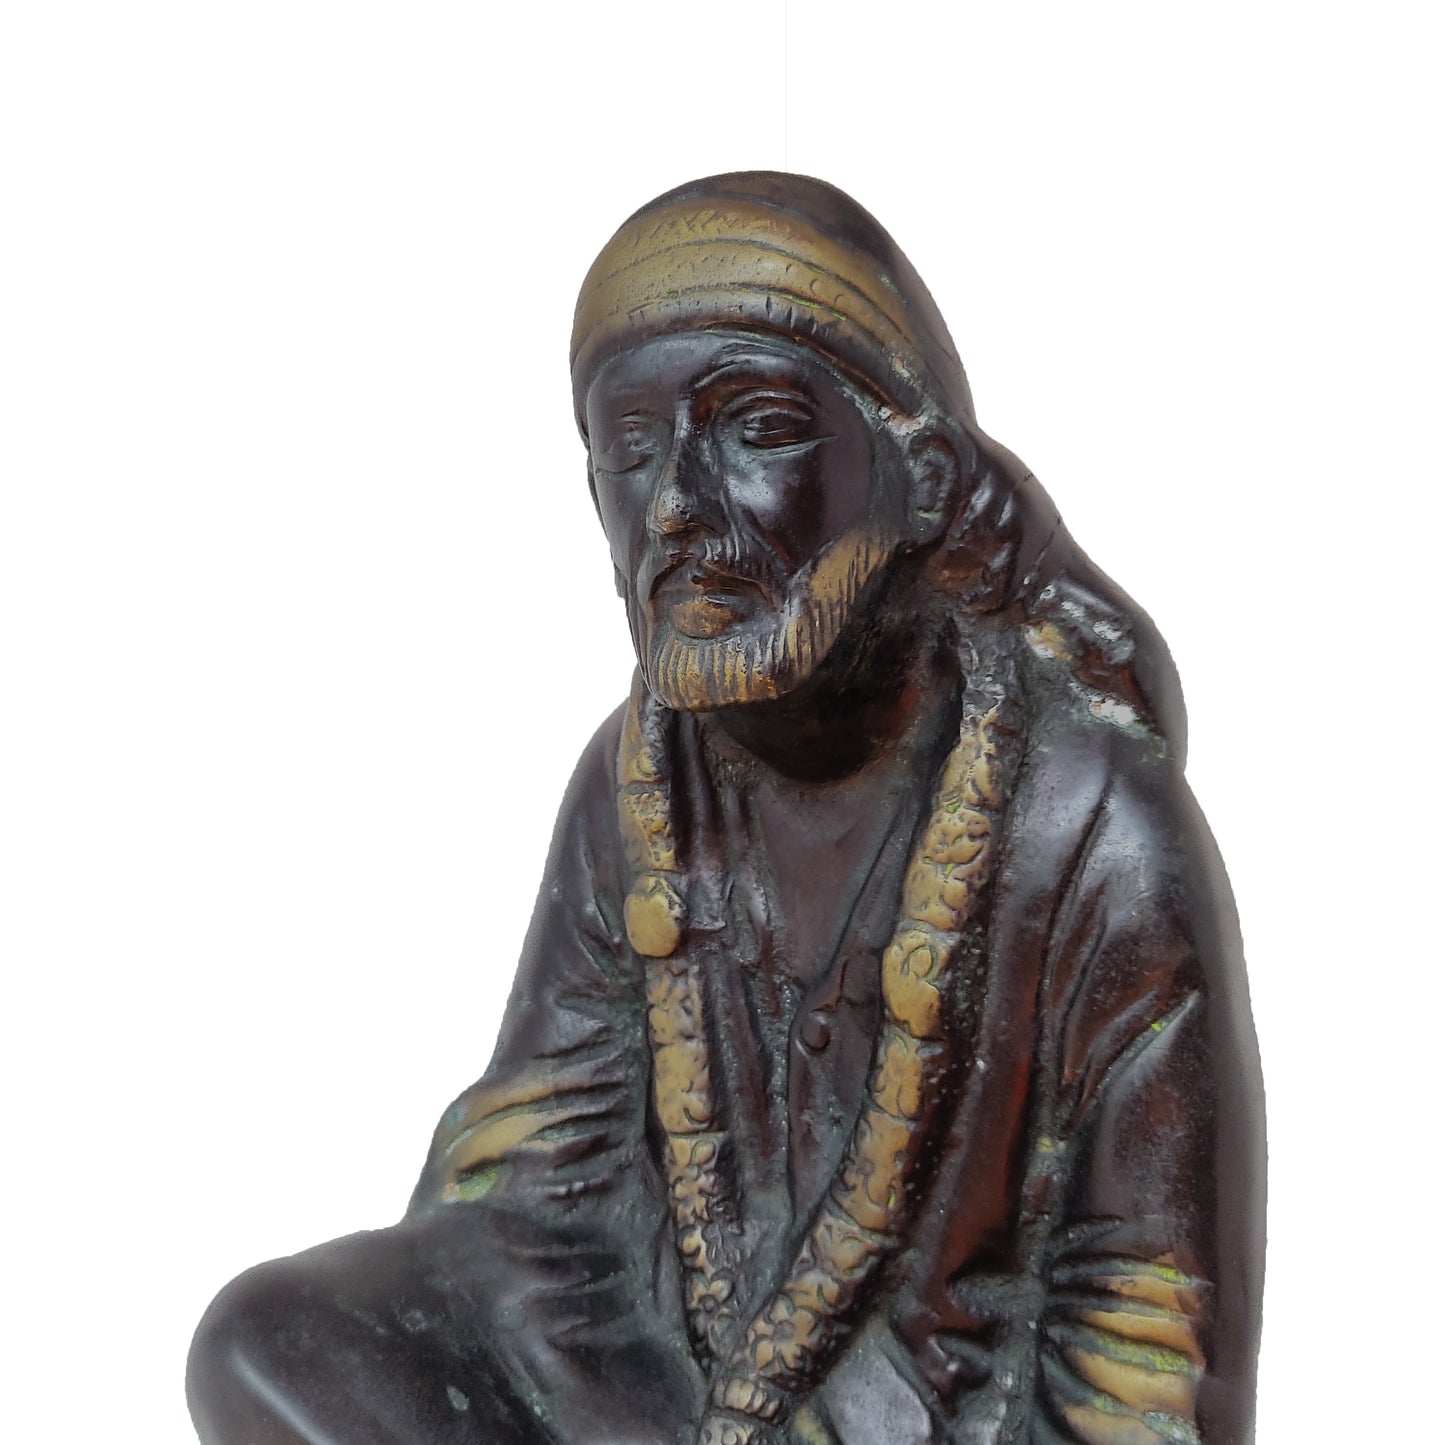 Black Sai Baba Statue India Blessing Baba Religious Home Decoration Sculpture 14"